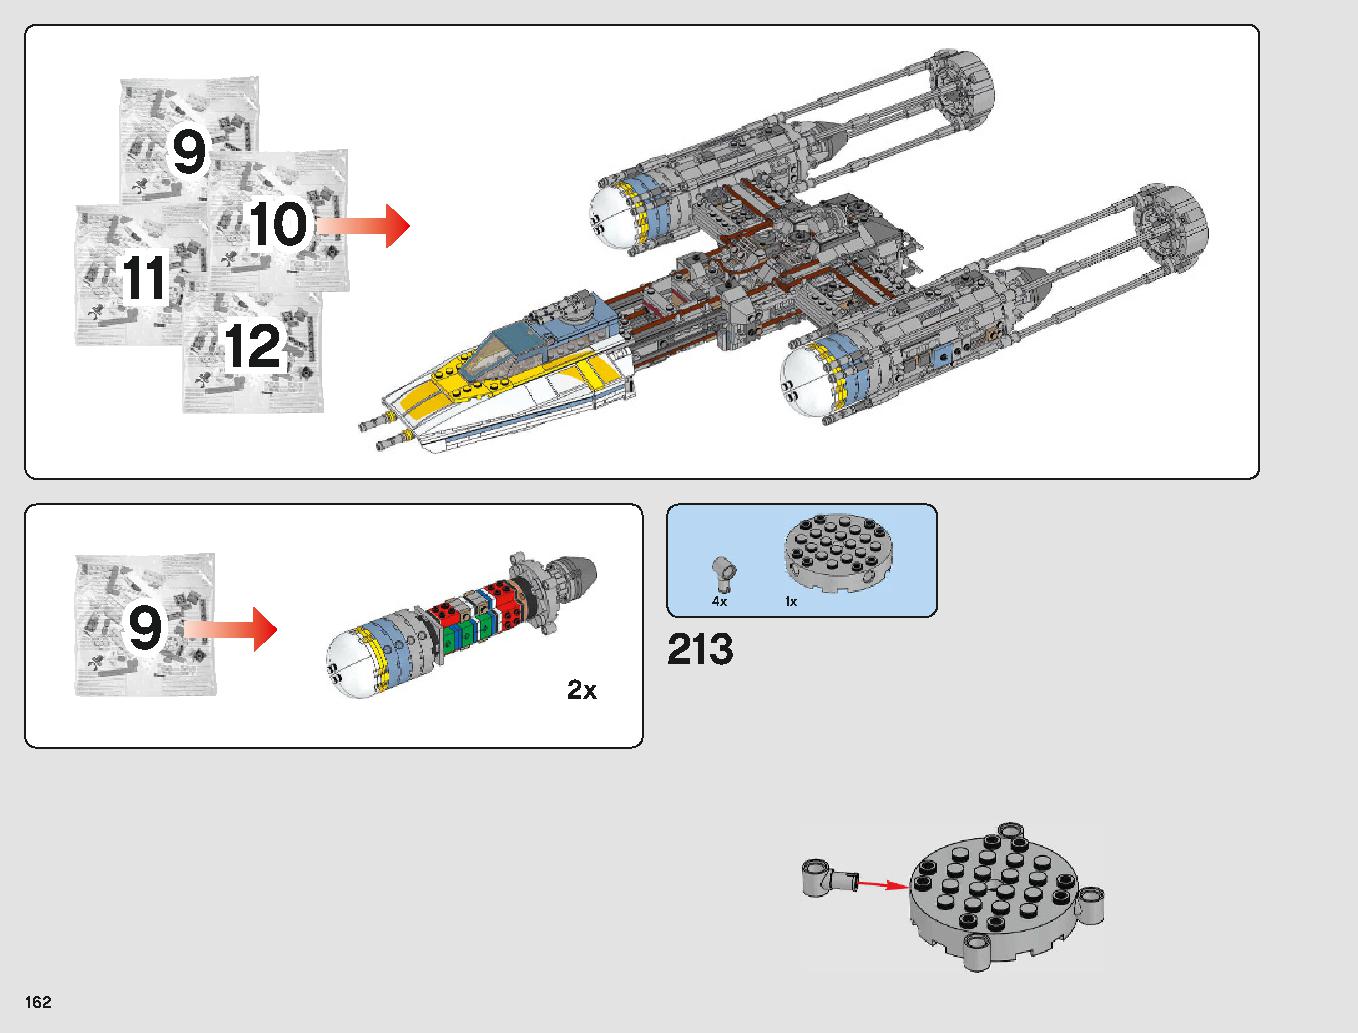 Y-Wing Starfighter 75181 LEGO information LEGO instructions 162 page